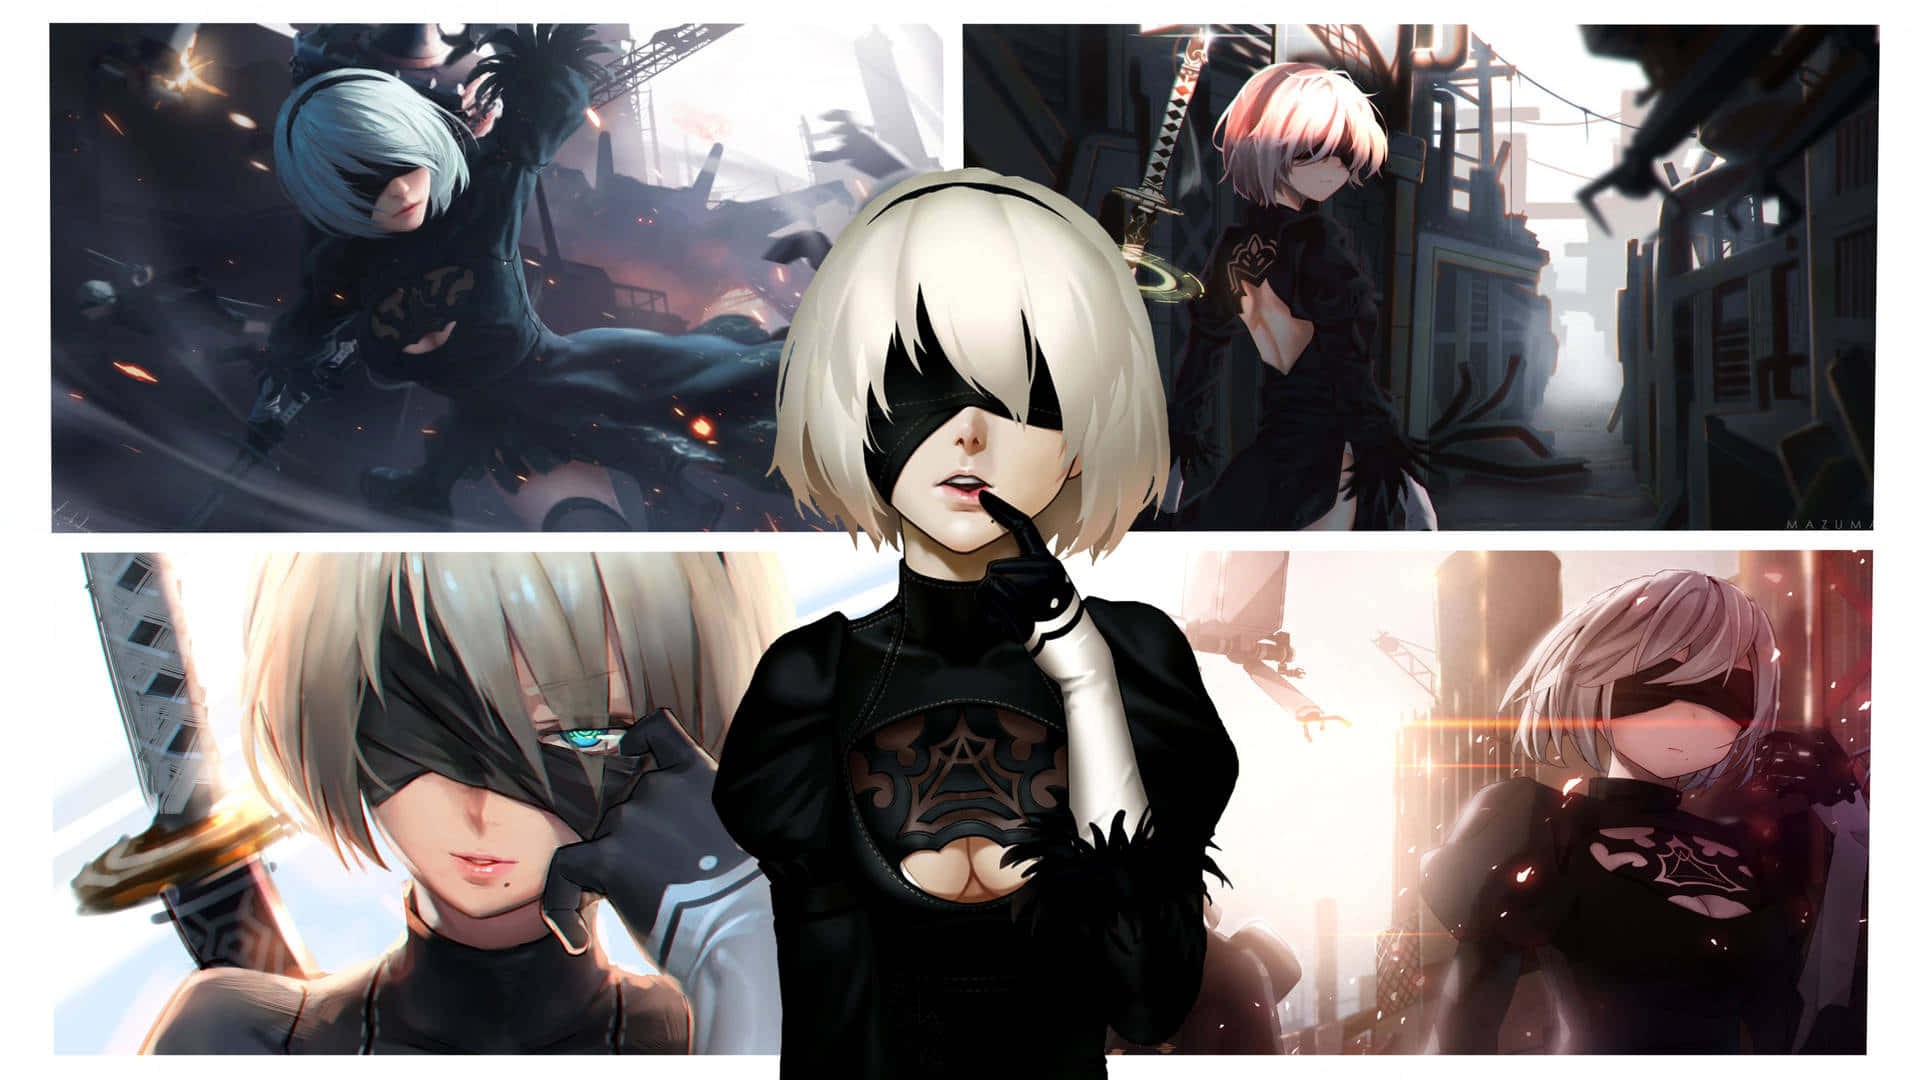 The Hovering Beauty of 2B